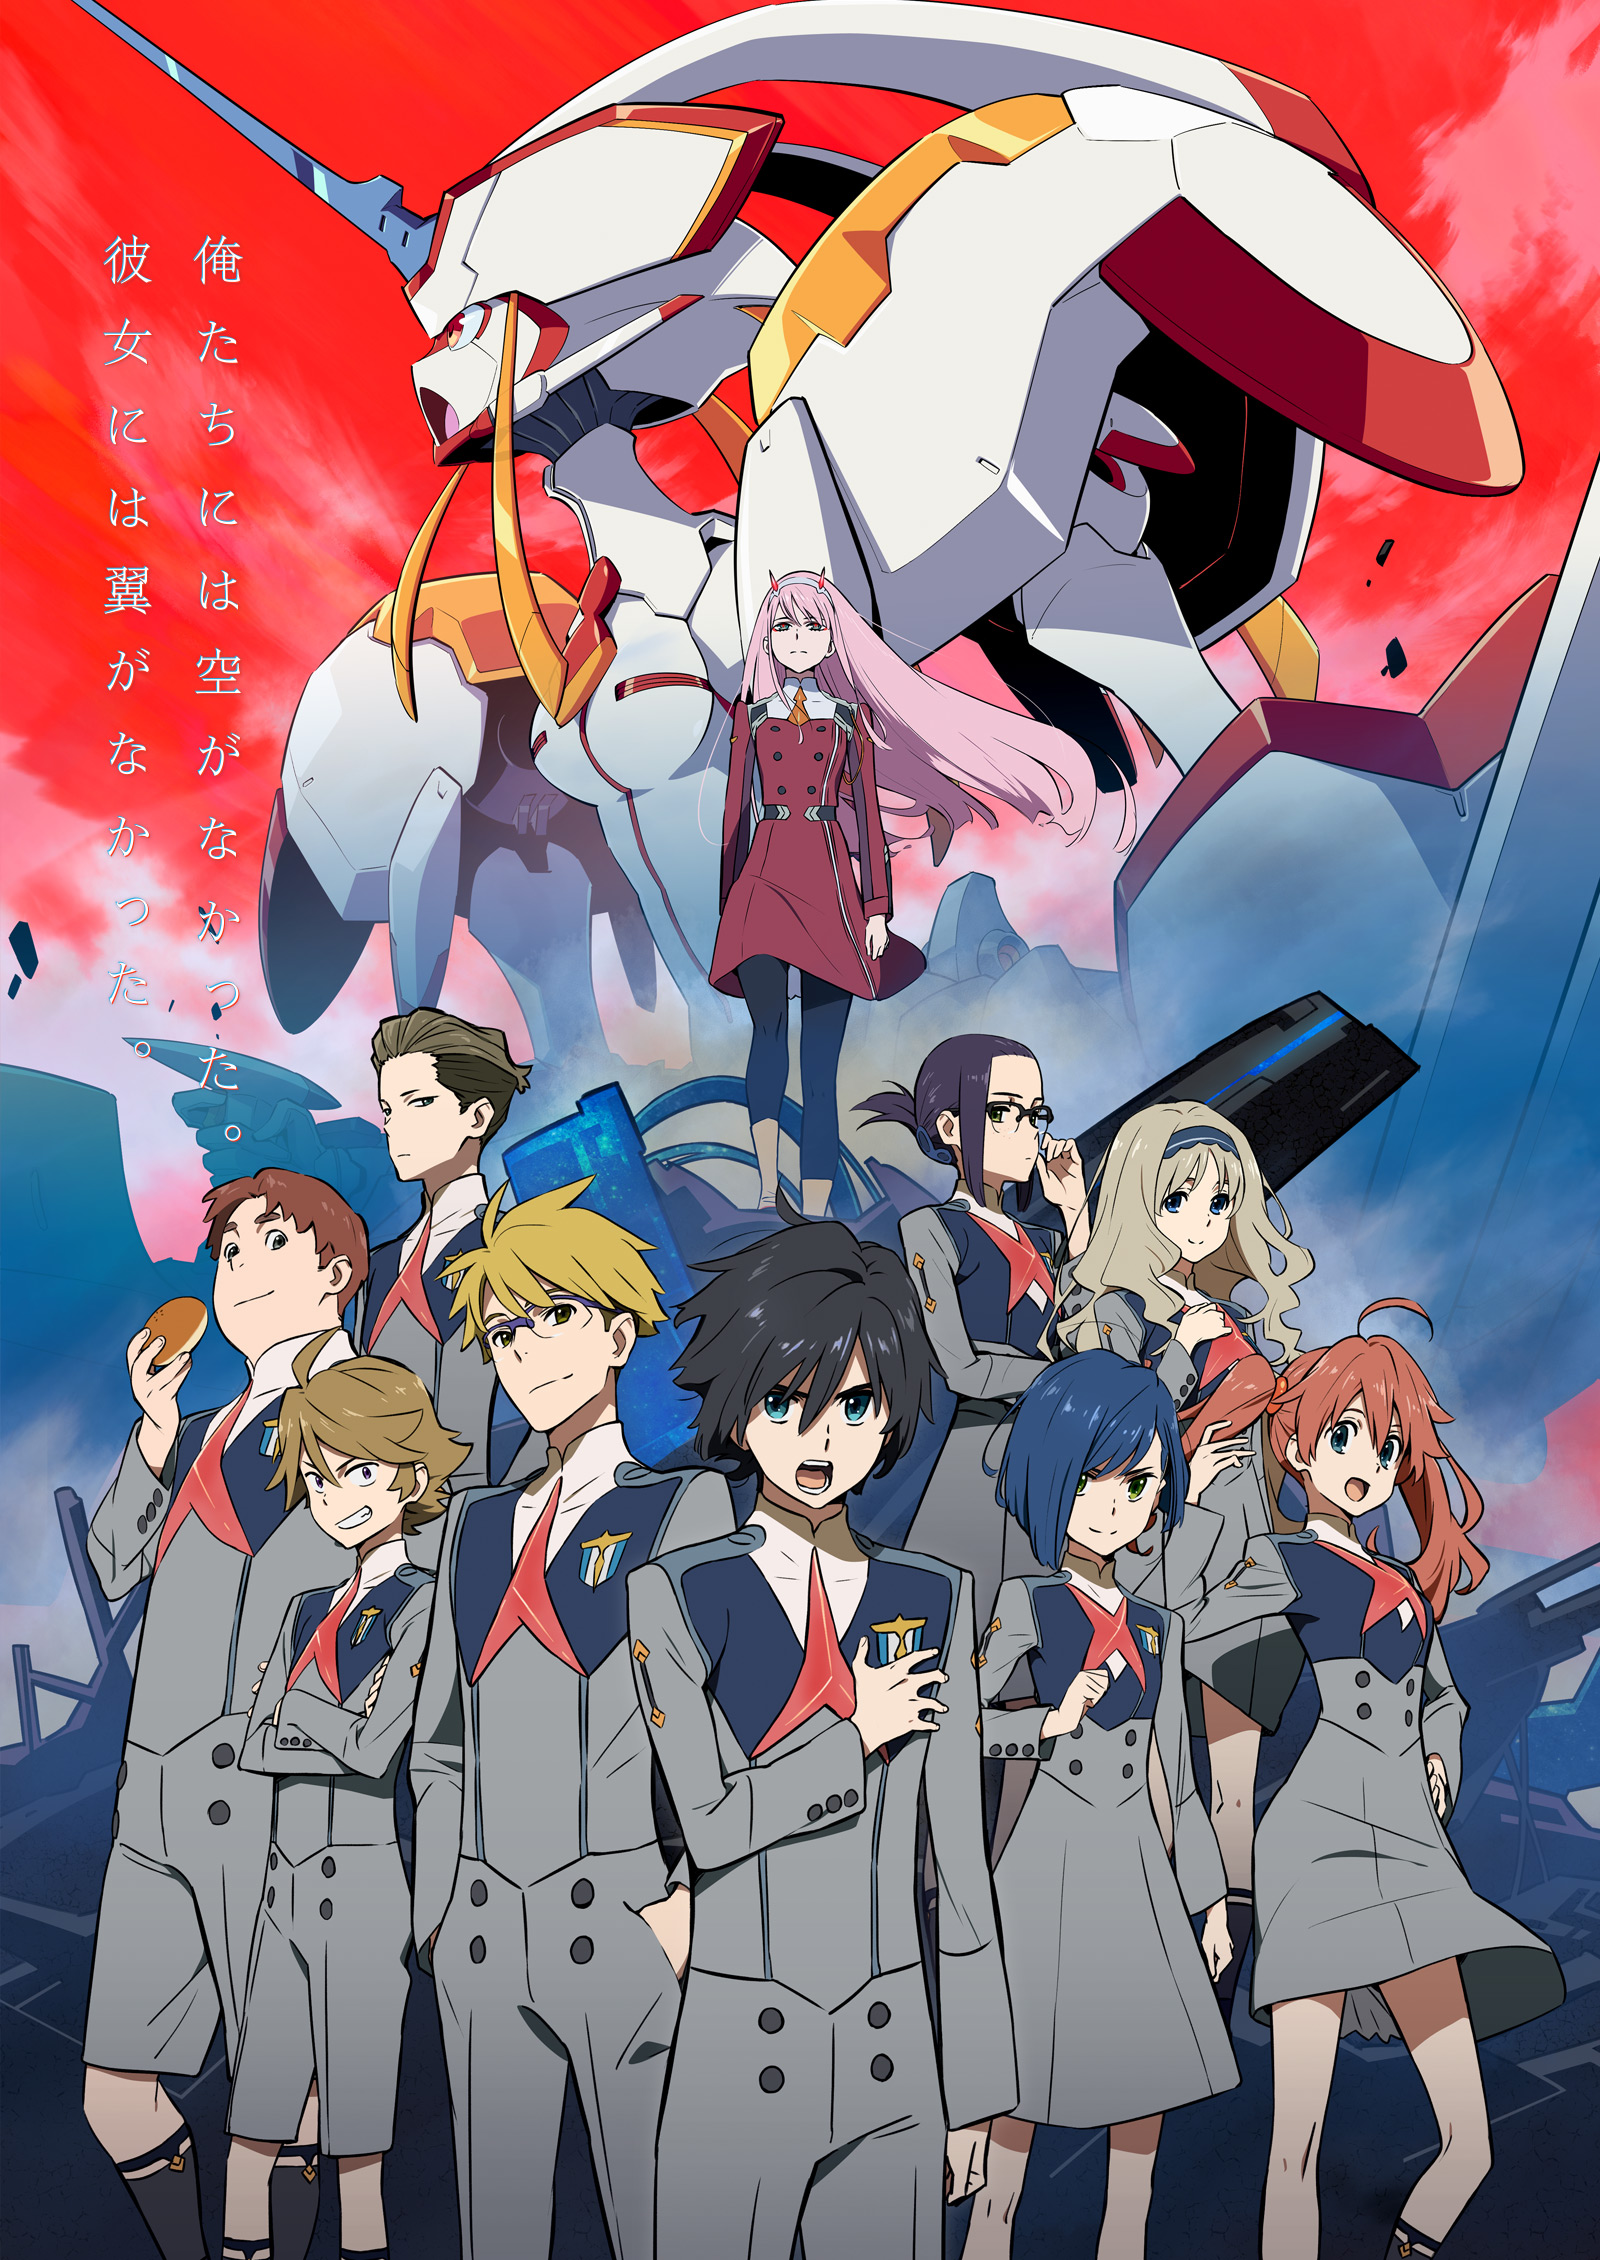 Poster Best Darling In The Fran Xx Anime Series Matte Finish Paper Poster  Print 12 x 18 Inch (Multicolor) PB-13738 : Amazon.in: Home & Kitchen